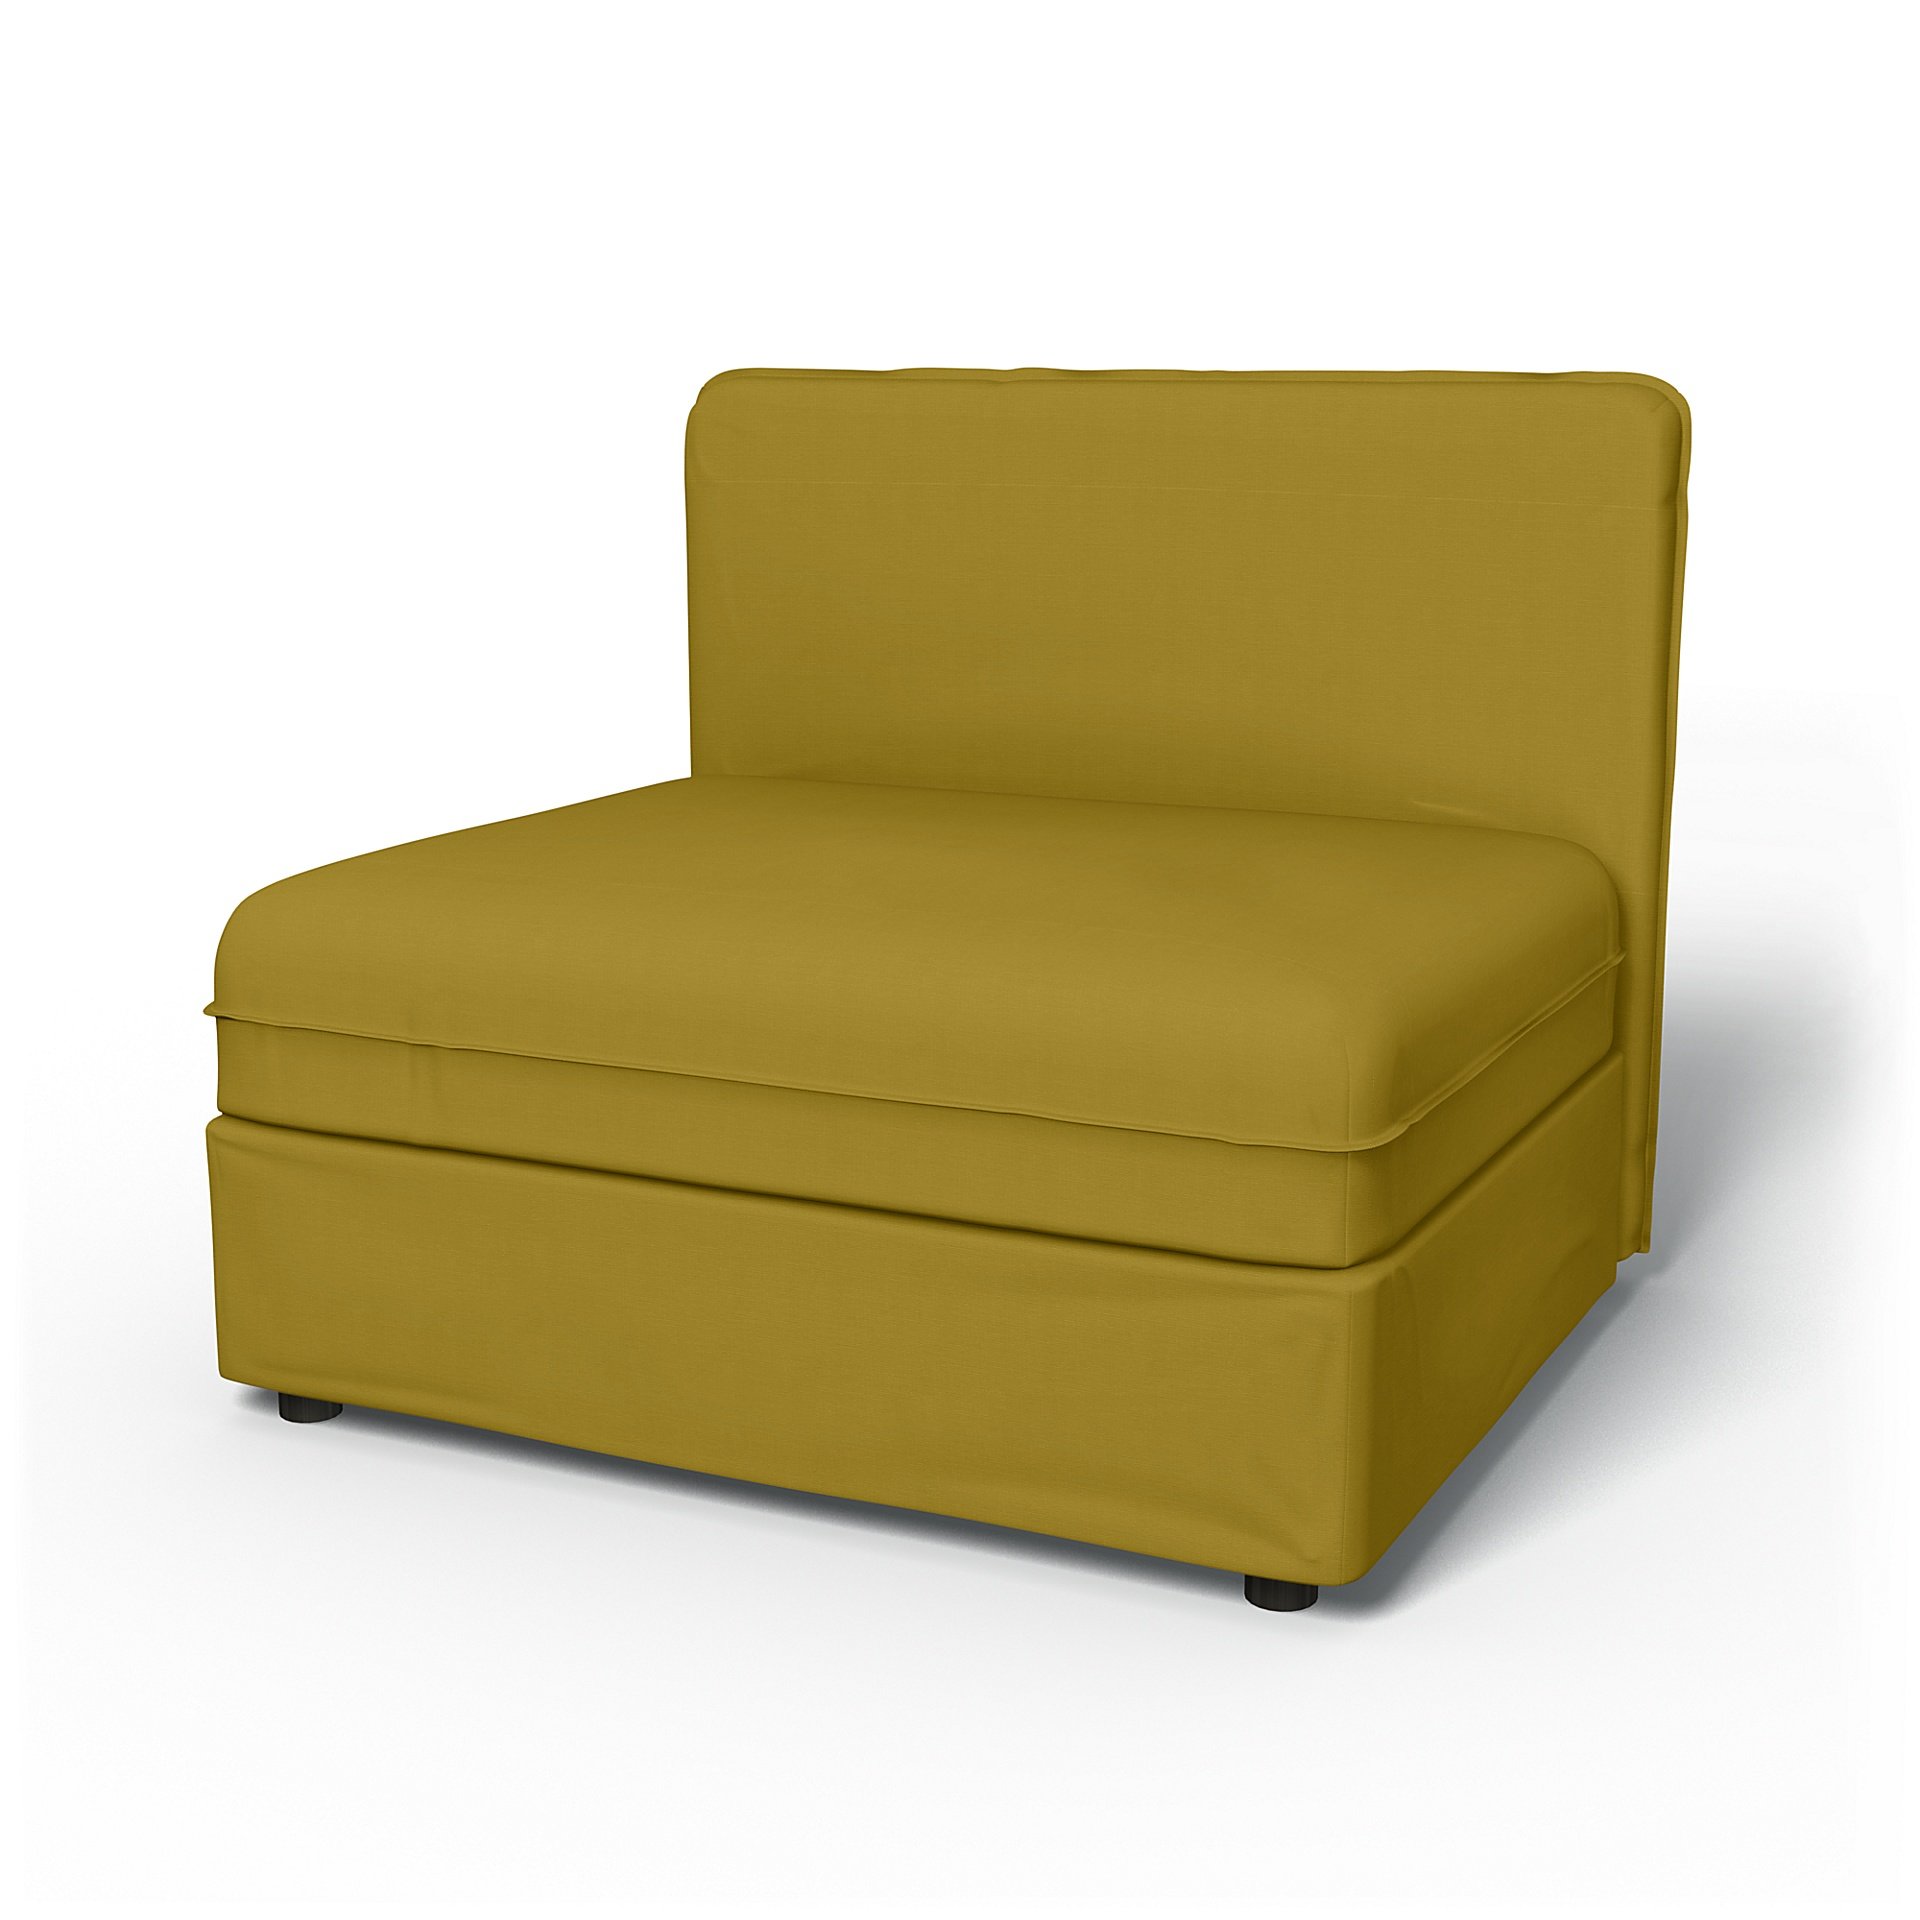 IKEA - Vallentuna Seat Module with Low Back Cover 100x80cm 39x32in, Olive Oil, Cotton - Bemz